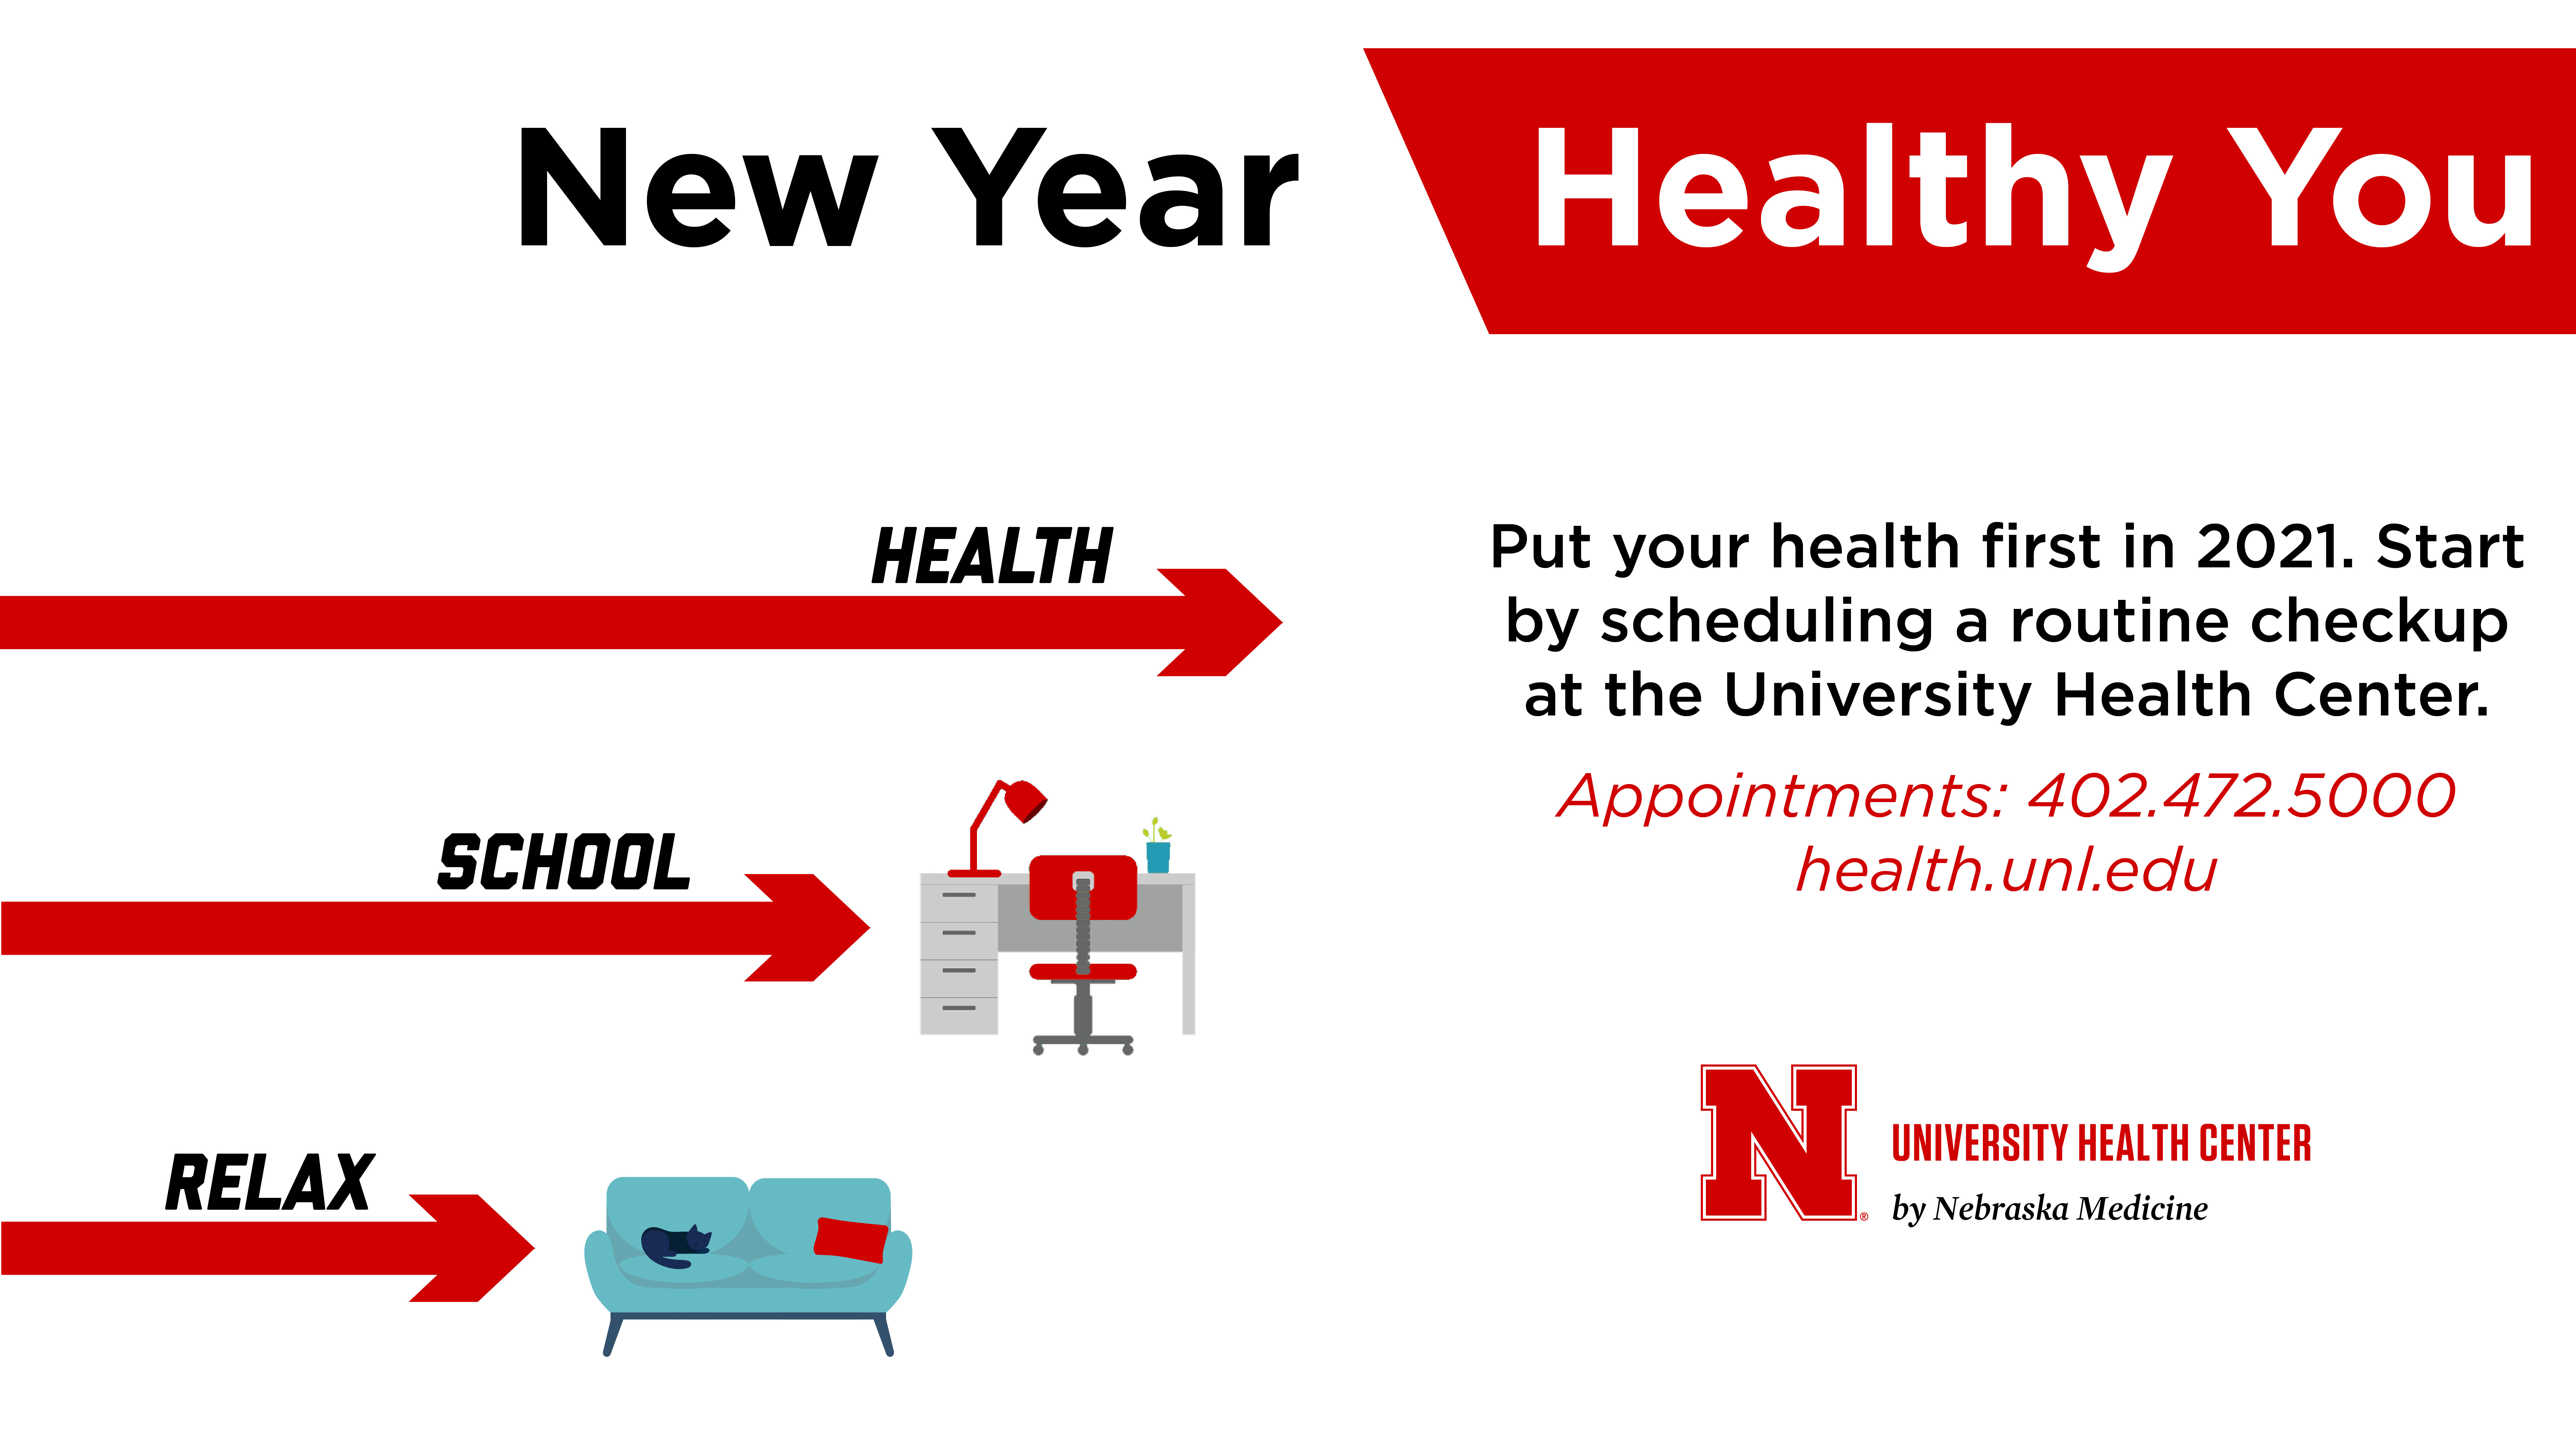 New Year, Healthy You!